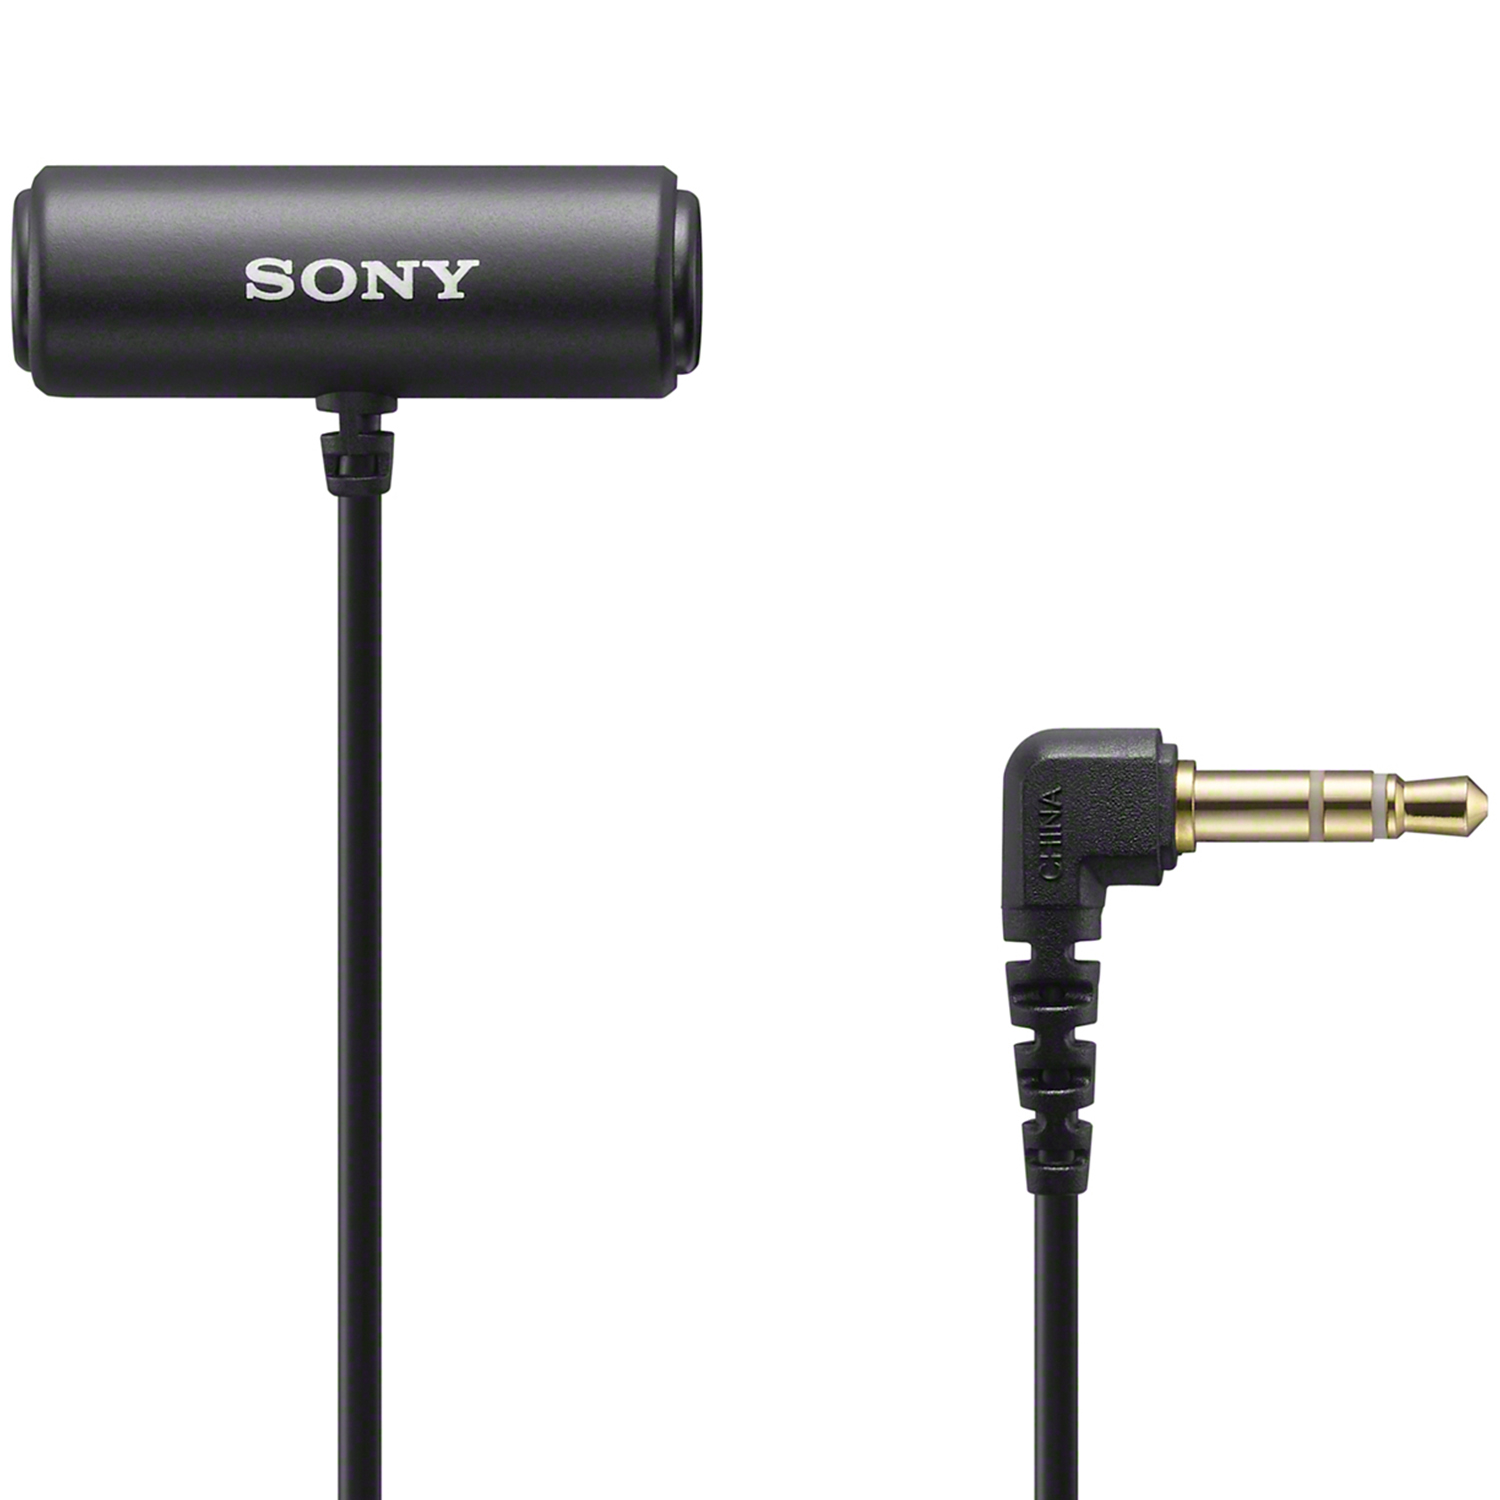 Sony Compact Stereo Lavalier Microphone - ECM-LV1